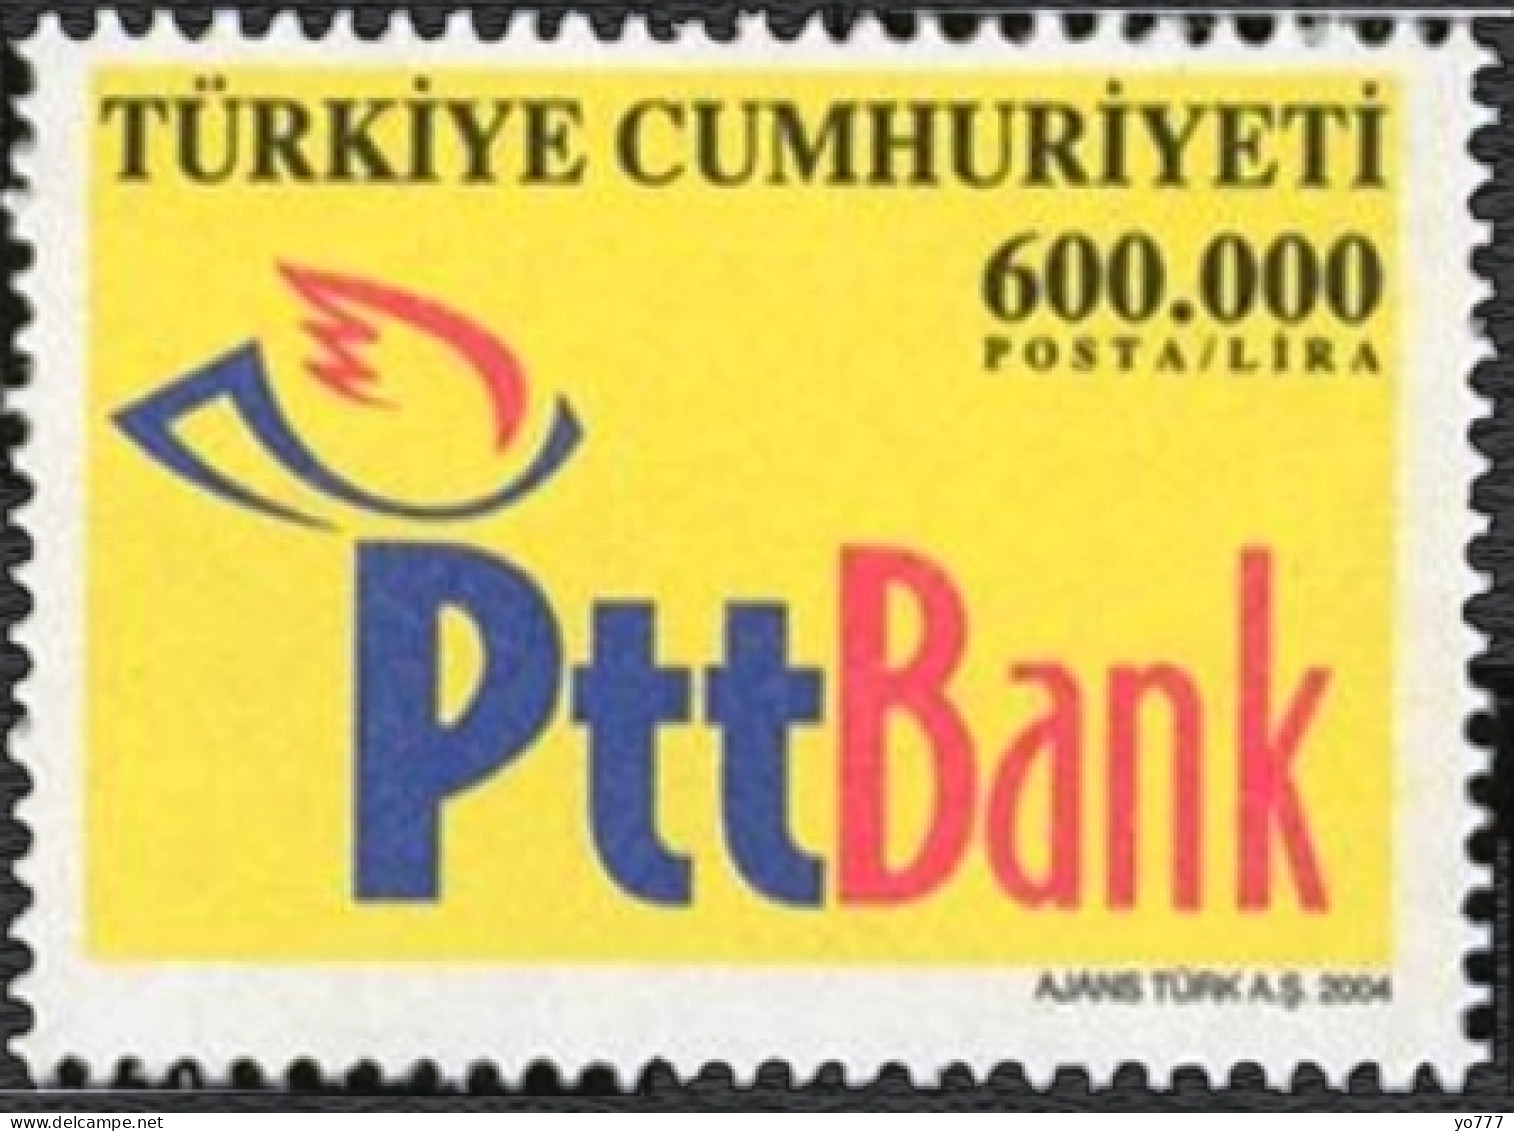 (3369) TURKEY REGULAR ISSUE STAMPS WITH THE THEME OF PTT BANK MNH** - Ungebraucht